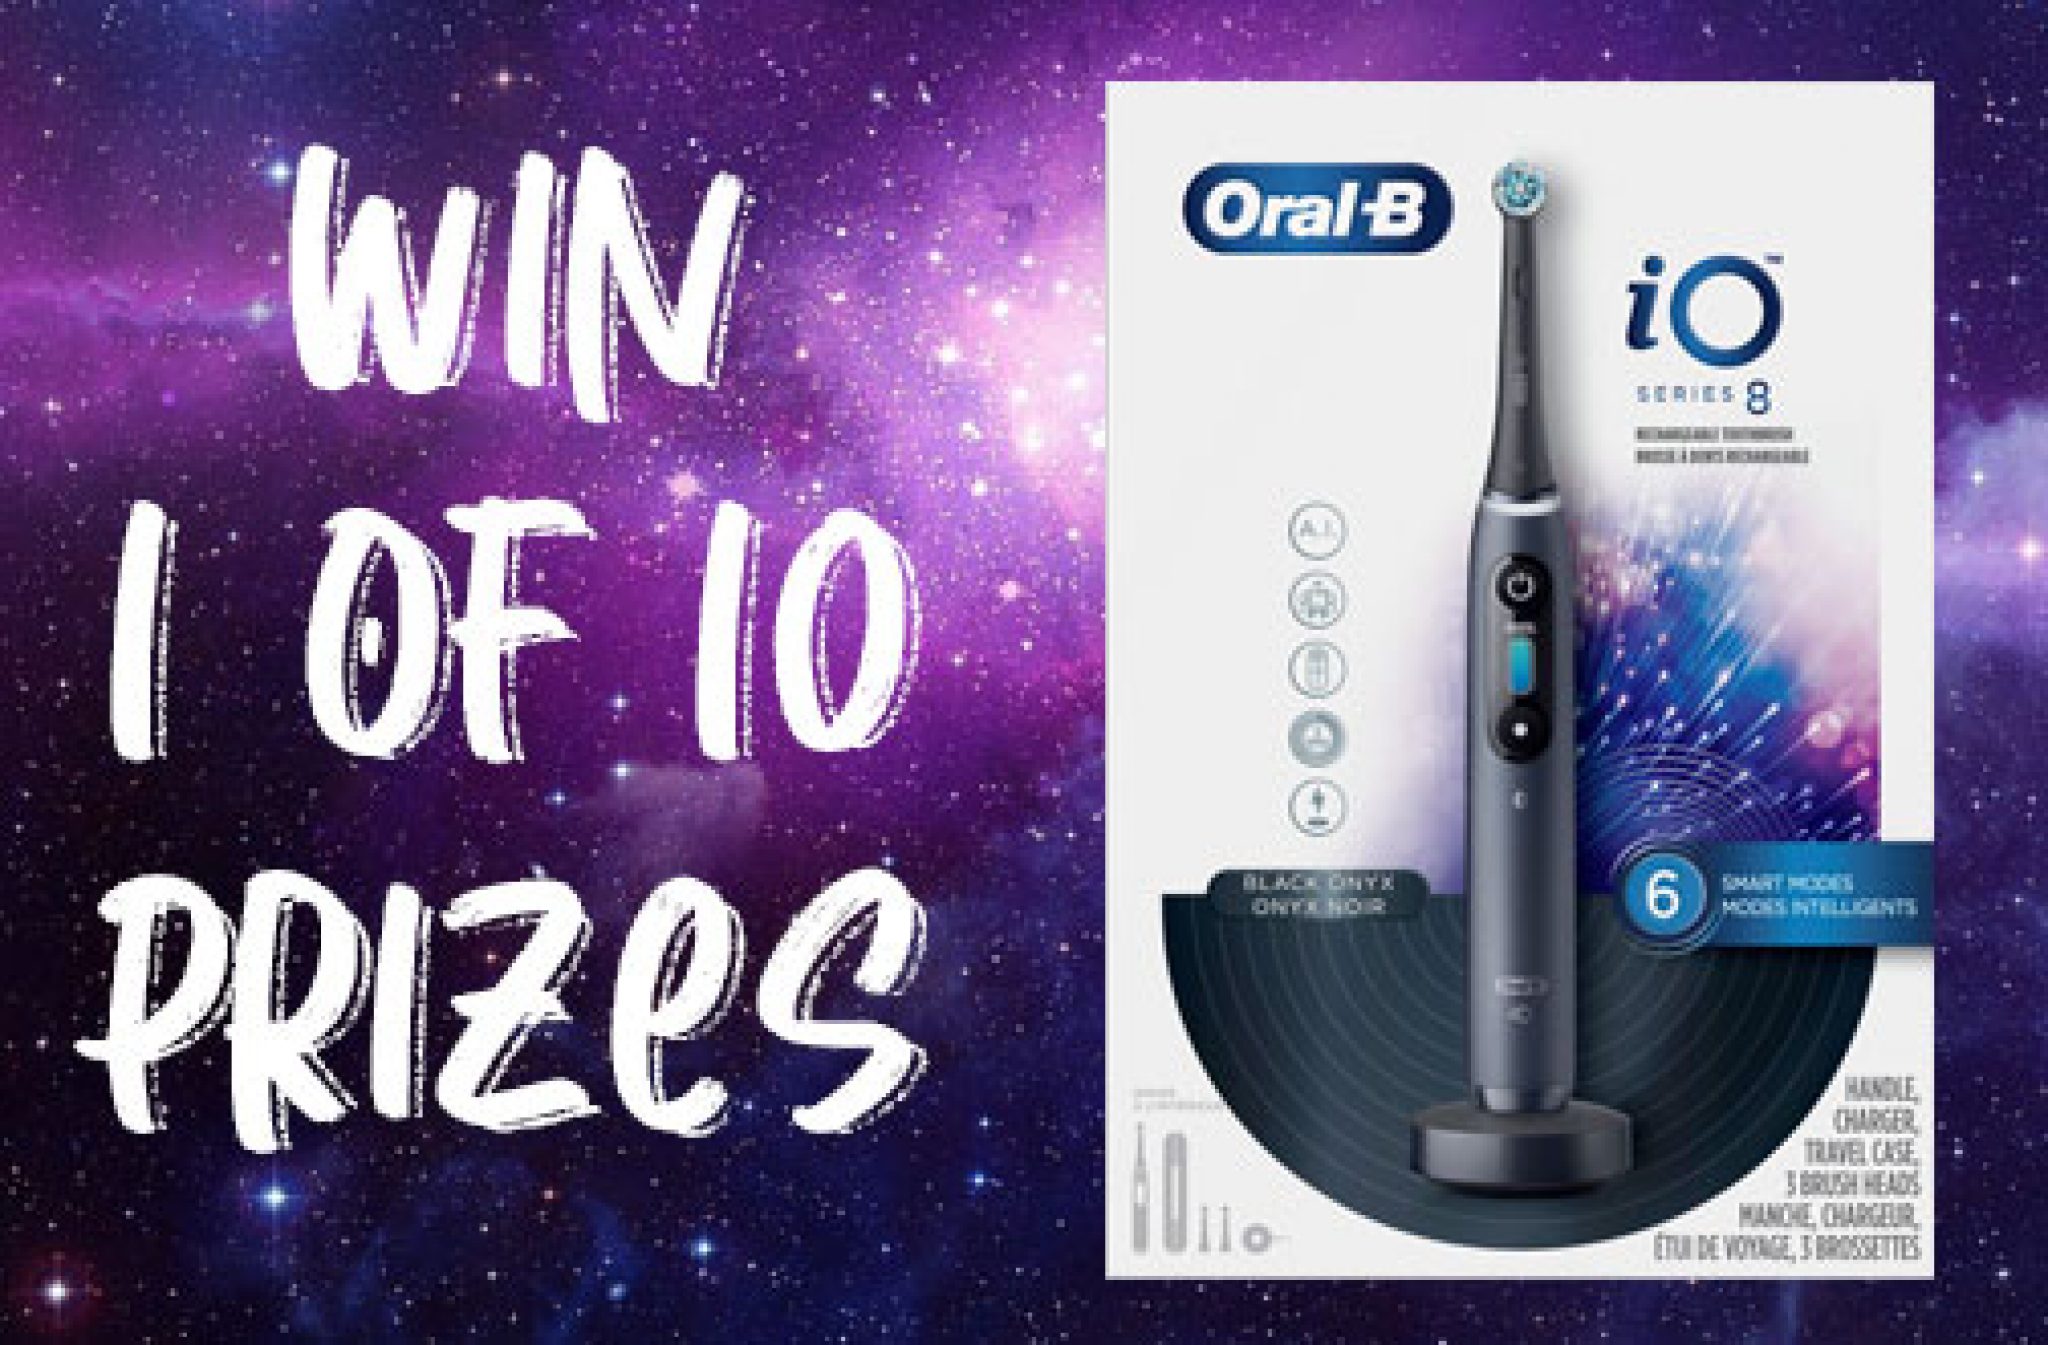 oral-b-contest-win-1-of-10-oral-b-io-toothbrushes-deals-from